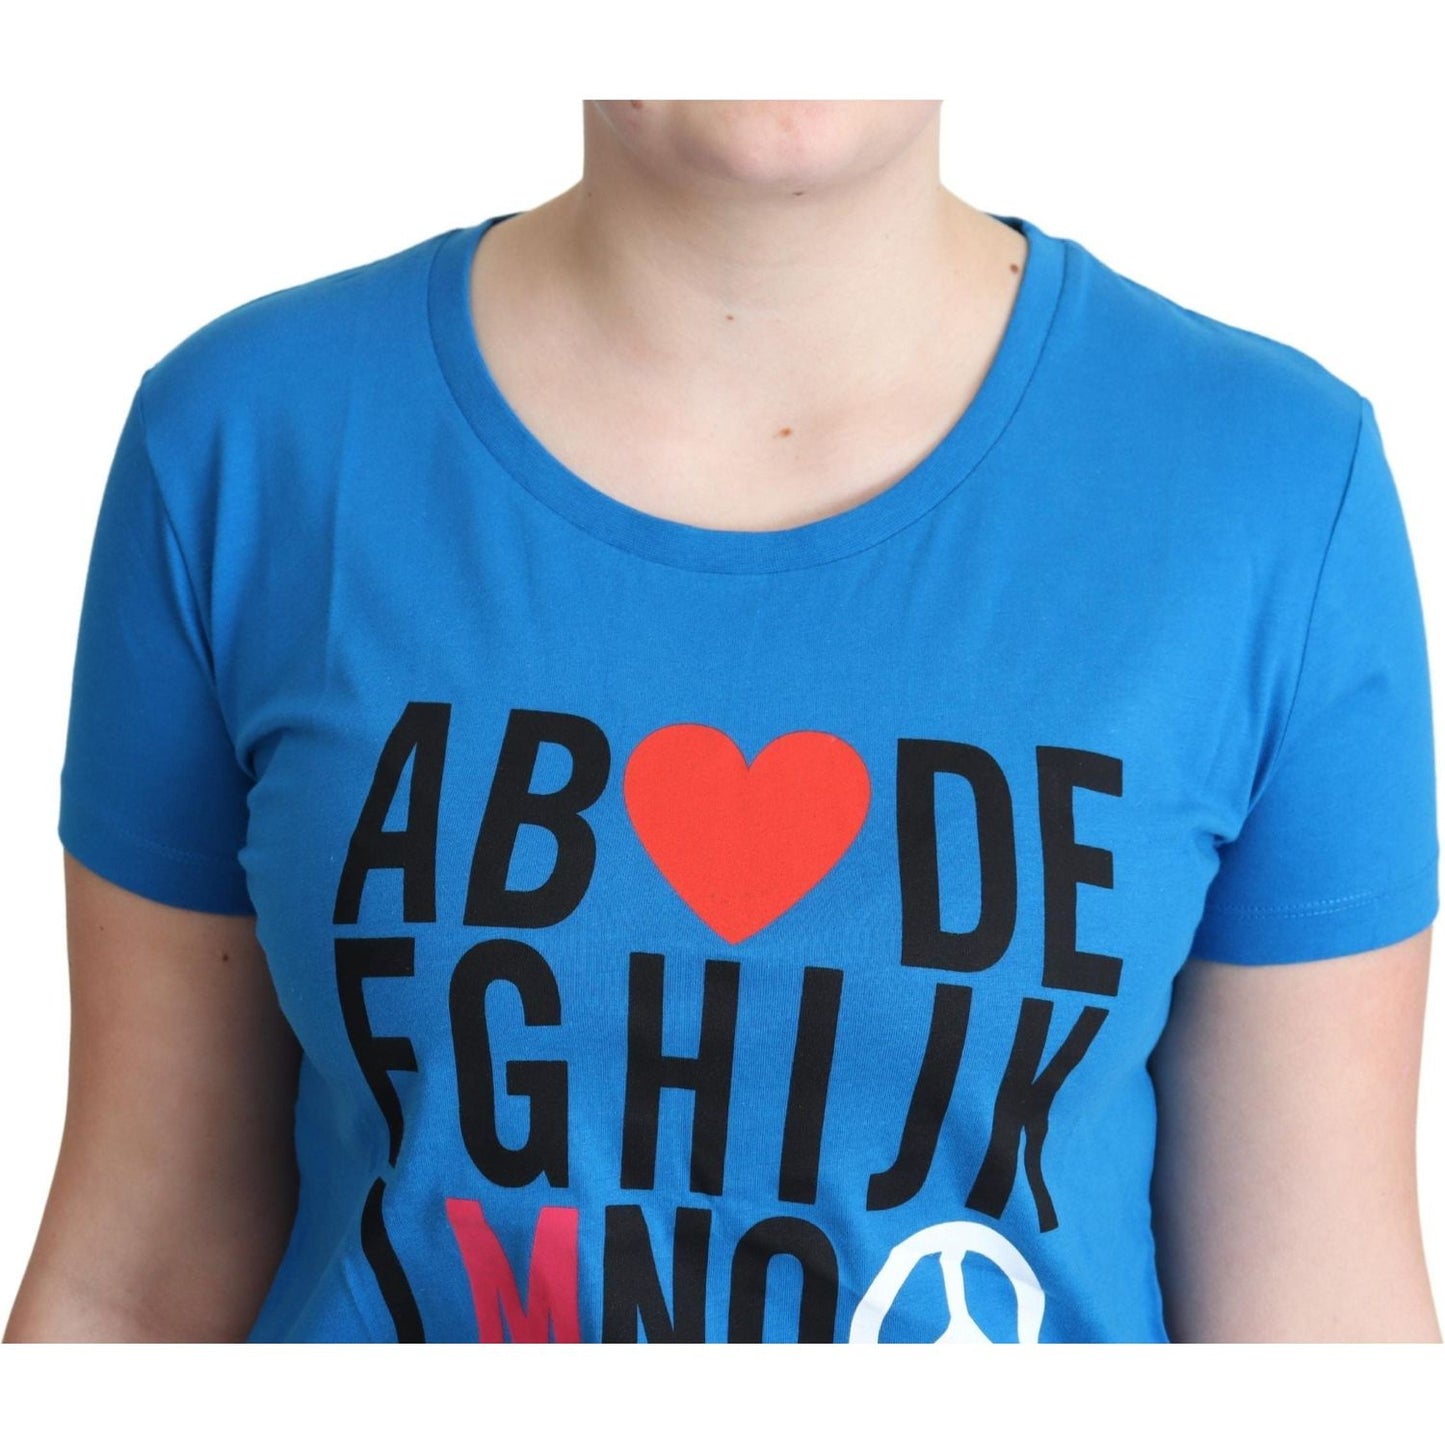 Moschino Chic Alphabet Cotton Tee in Blue blue-cotton-alphabet-letter-print-tops IMG_0992-scaled-d91d0e78-a46.jpg